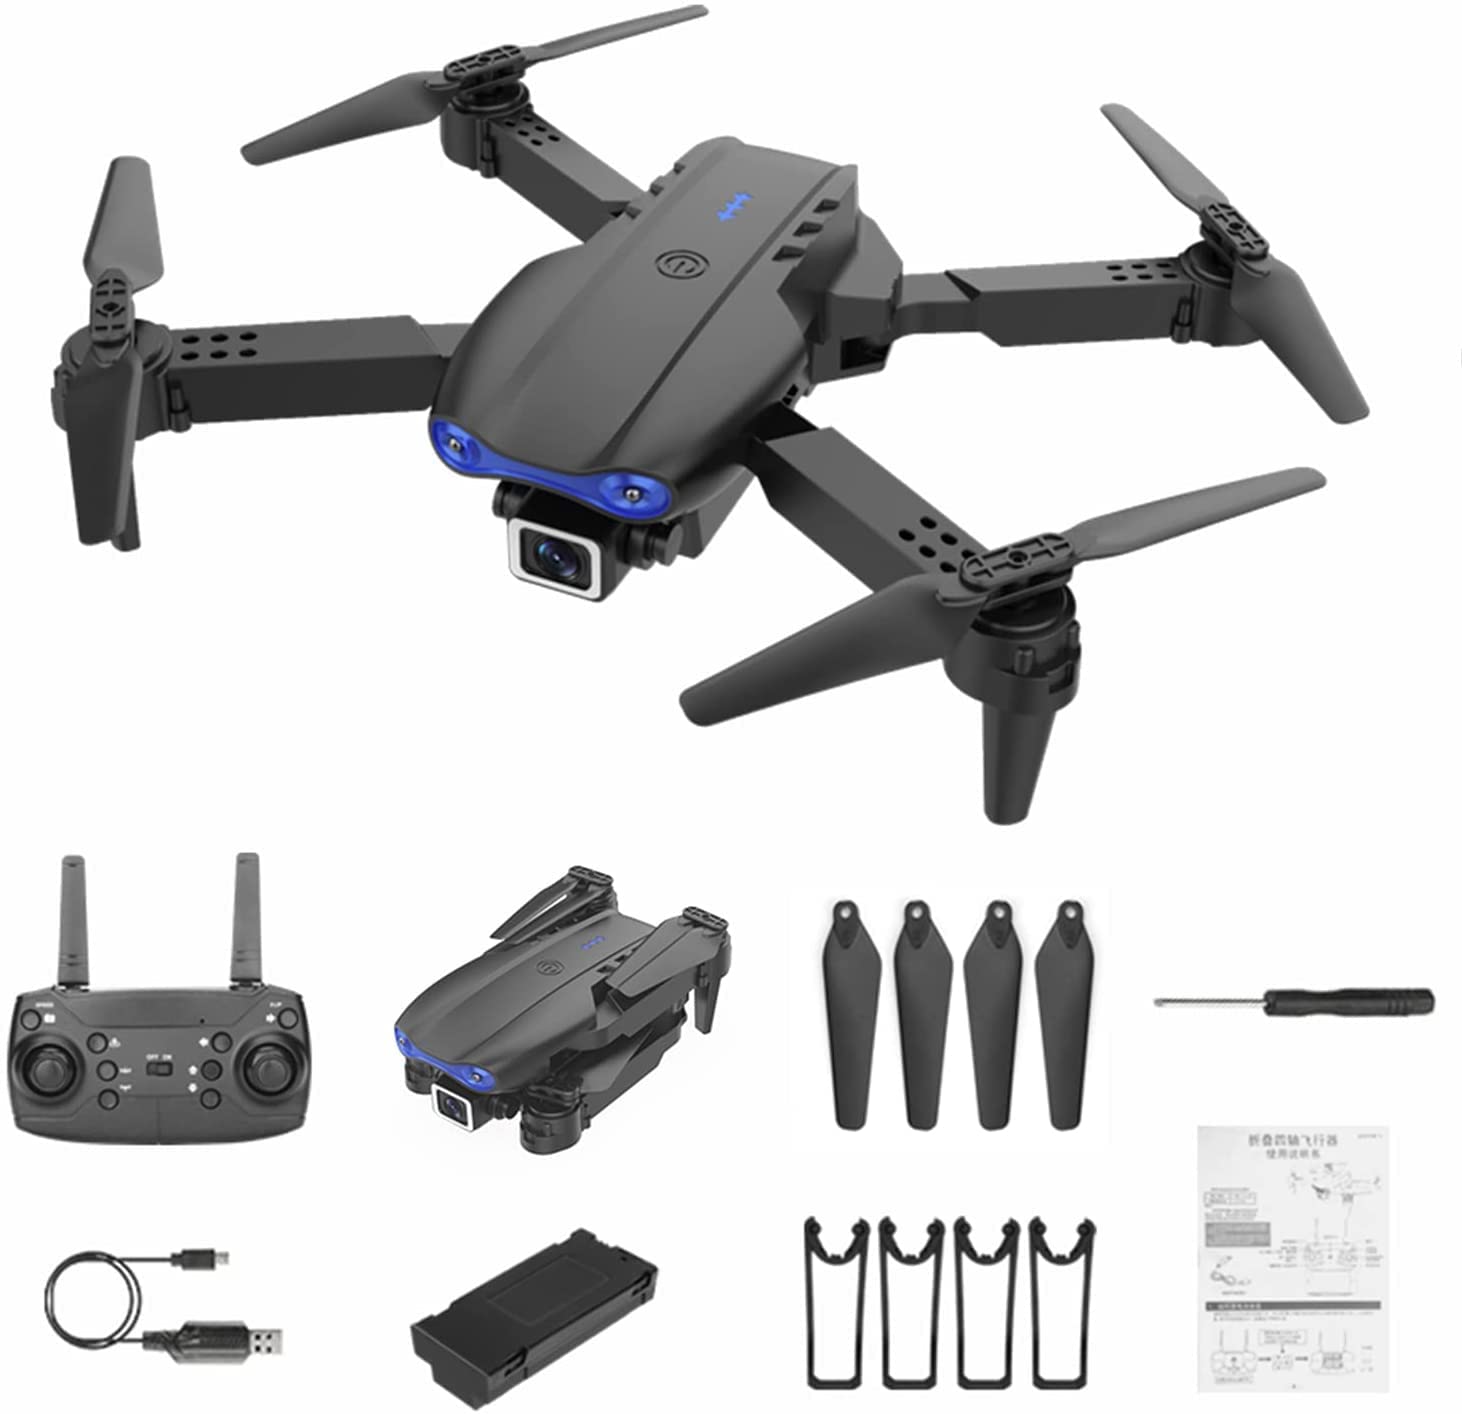 Drone with 1080P Dual HD Camera - 2022 Upgradded RC Quadcopter for Adults and Kids, WiFi FPV RC Drone for Beginners Live Video HD Wide Angle RC Aircraft, Trajectory Flight, Auto Hover, Carrying Case